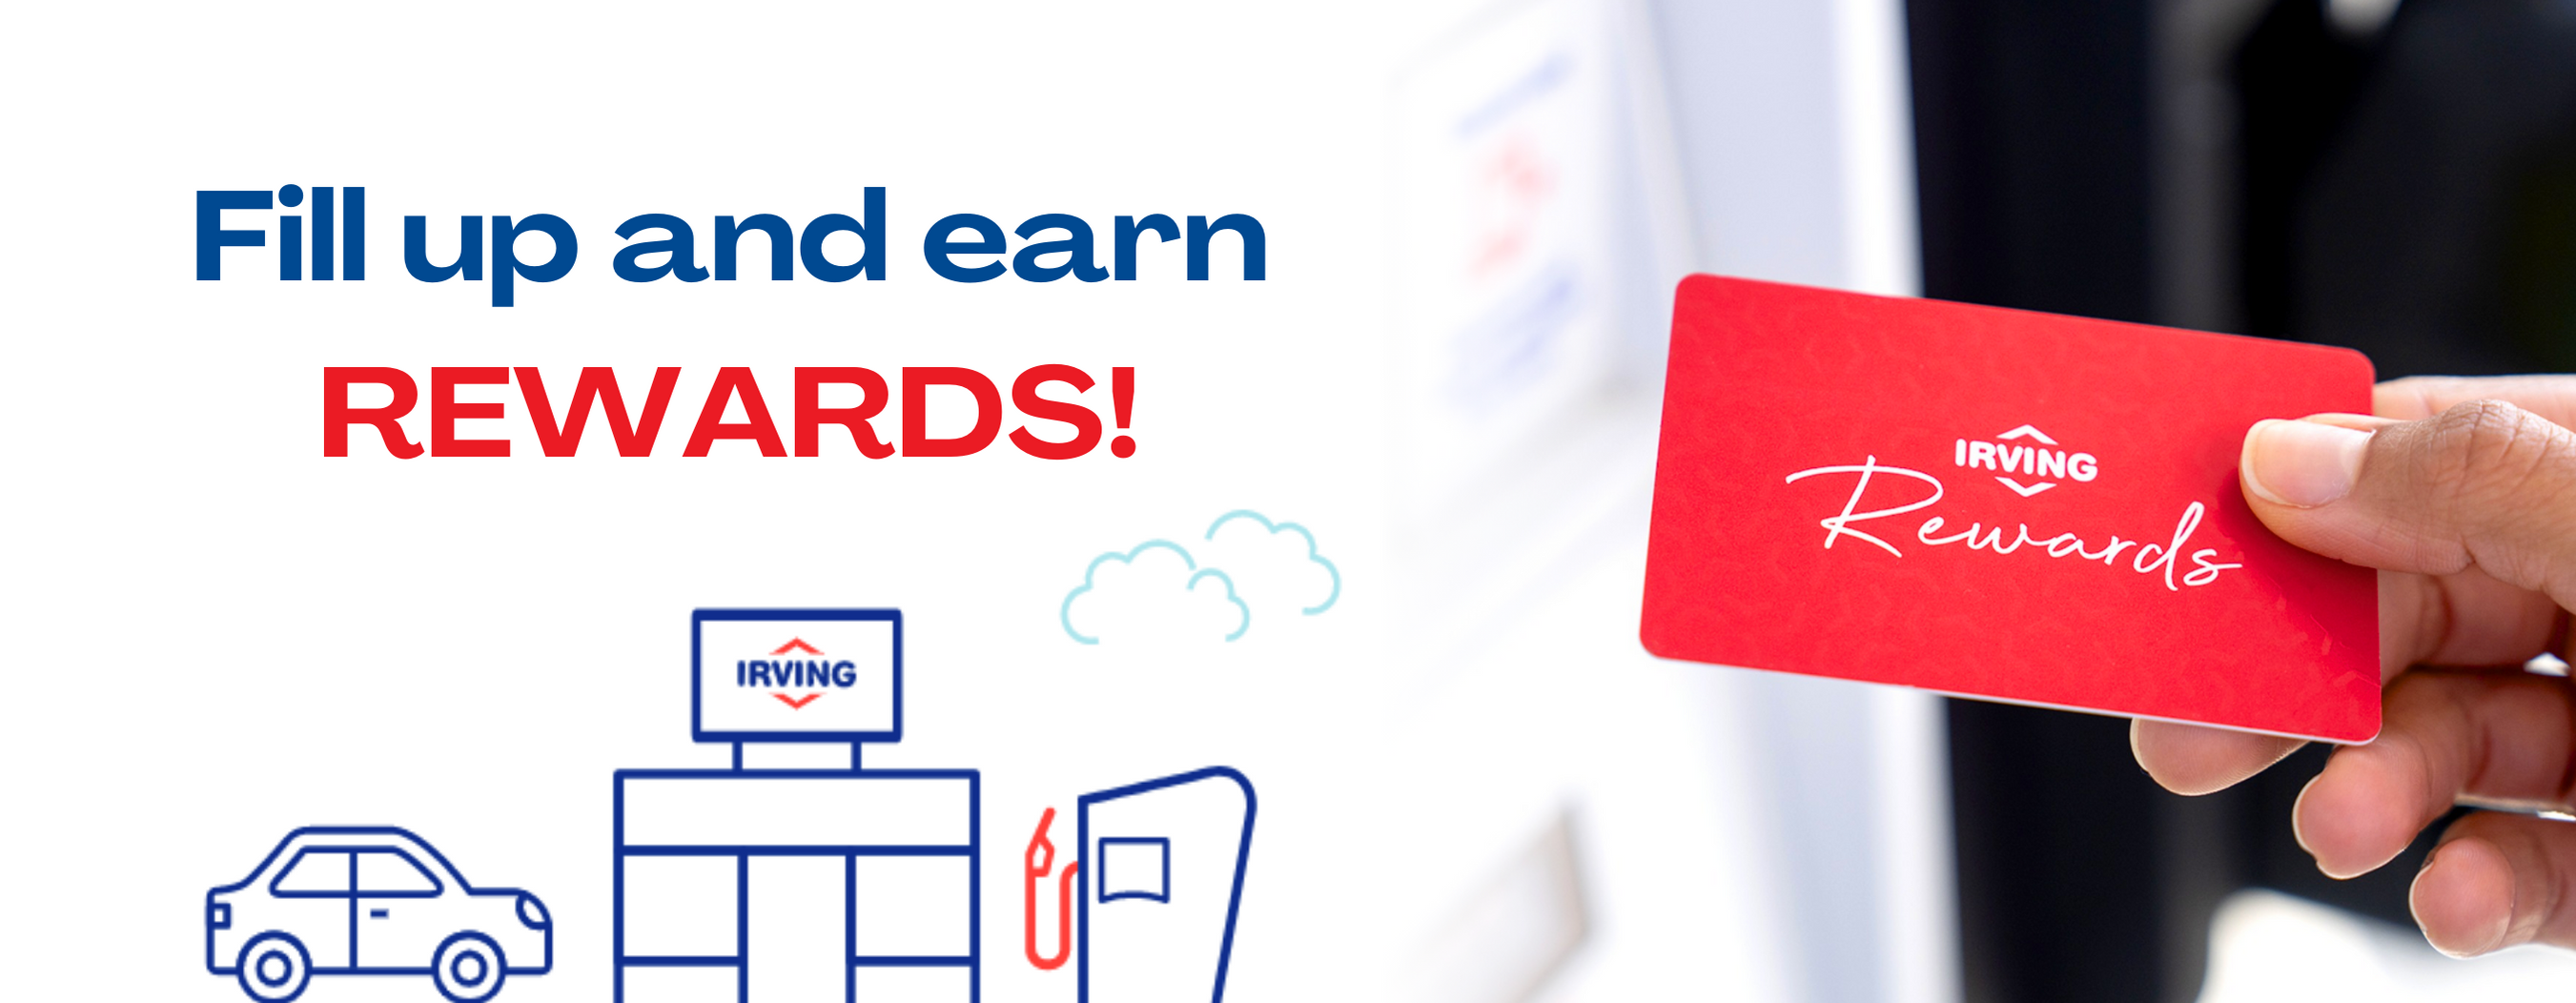 Irving Rewards card for earning rewards on fuel and drinks at Irving gas station food marts near me